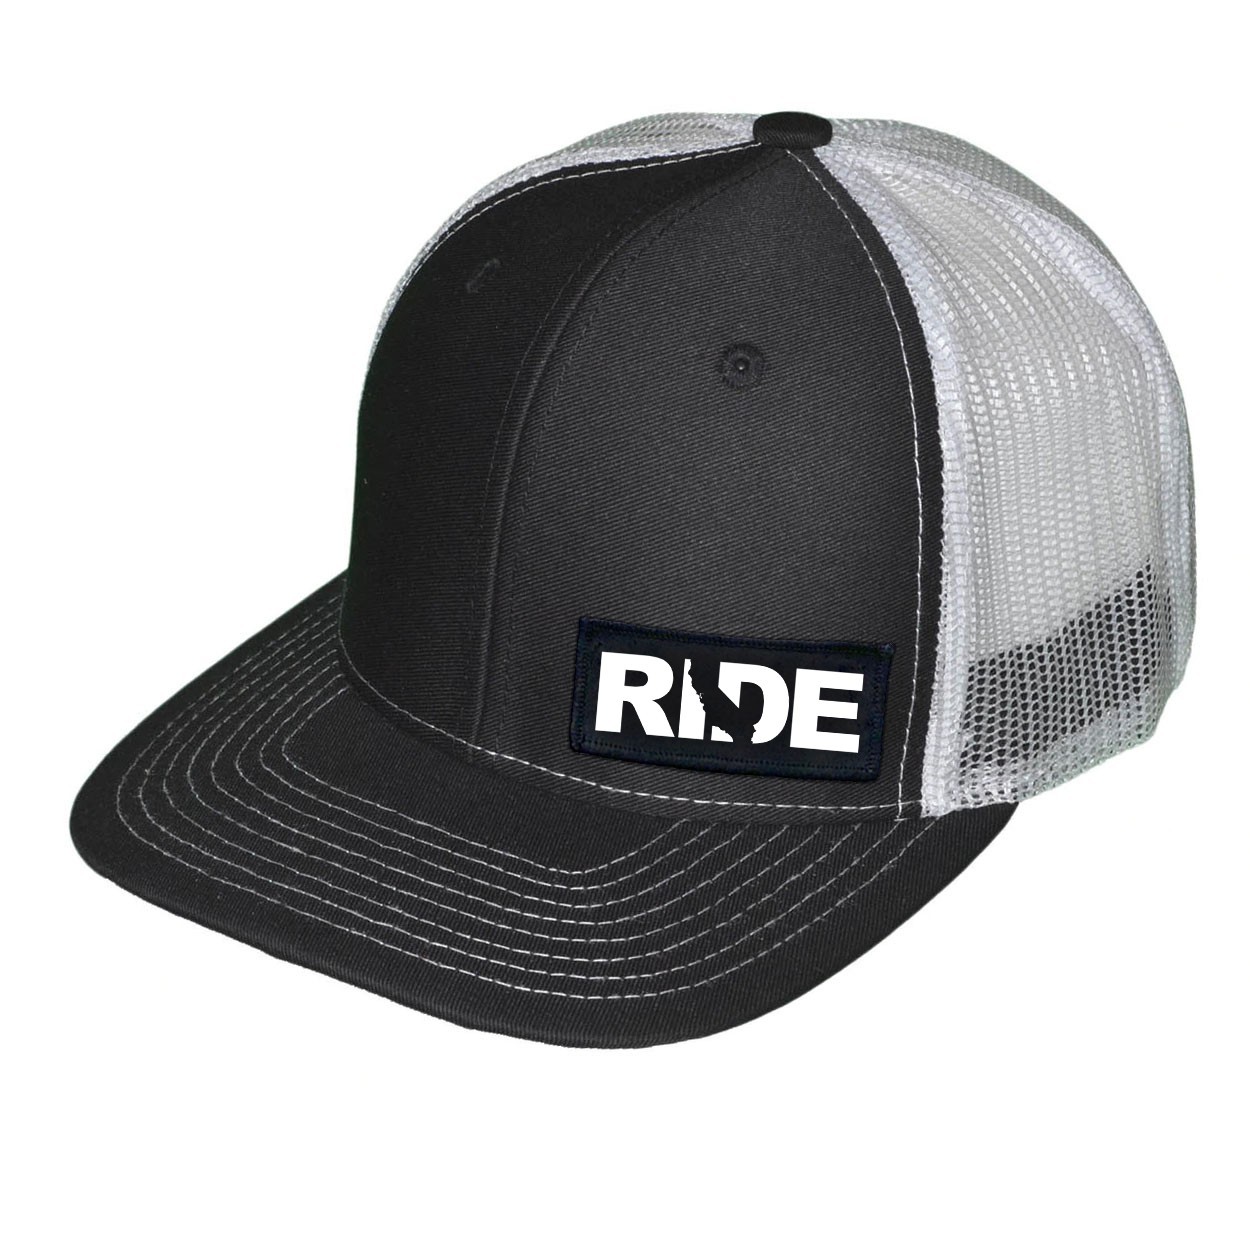 Ride California Night Out Woven Patch Snapback Trucker Hat Black/White (White Logo)